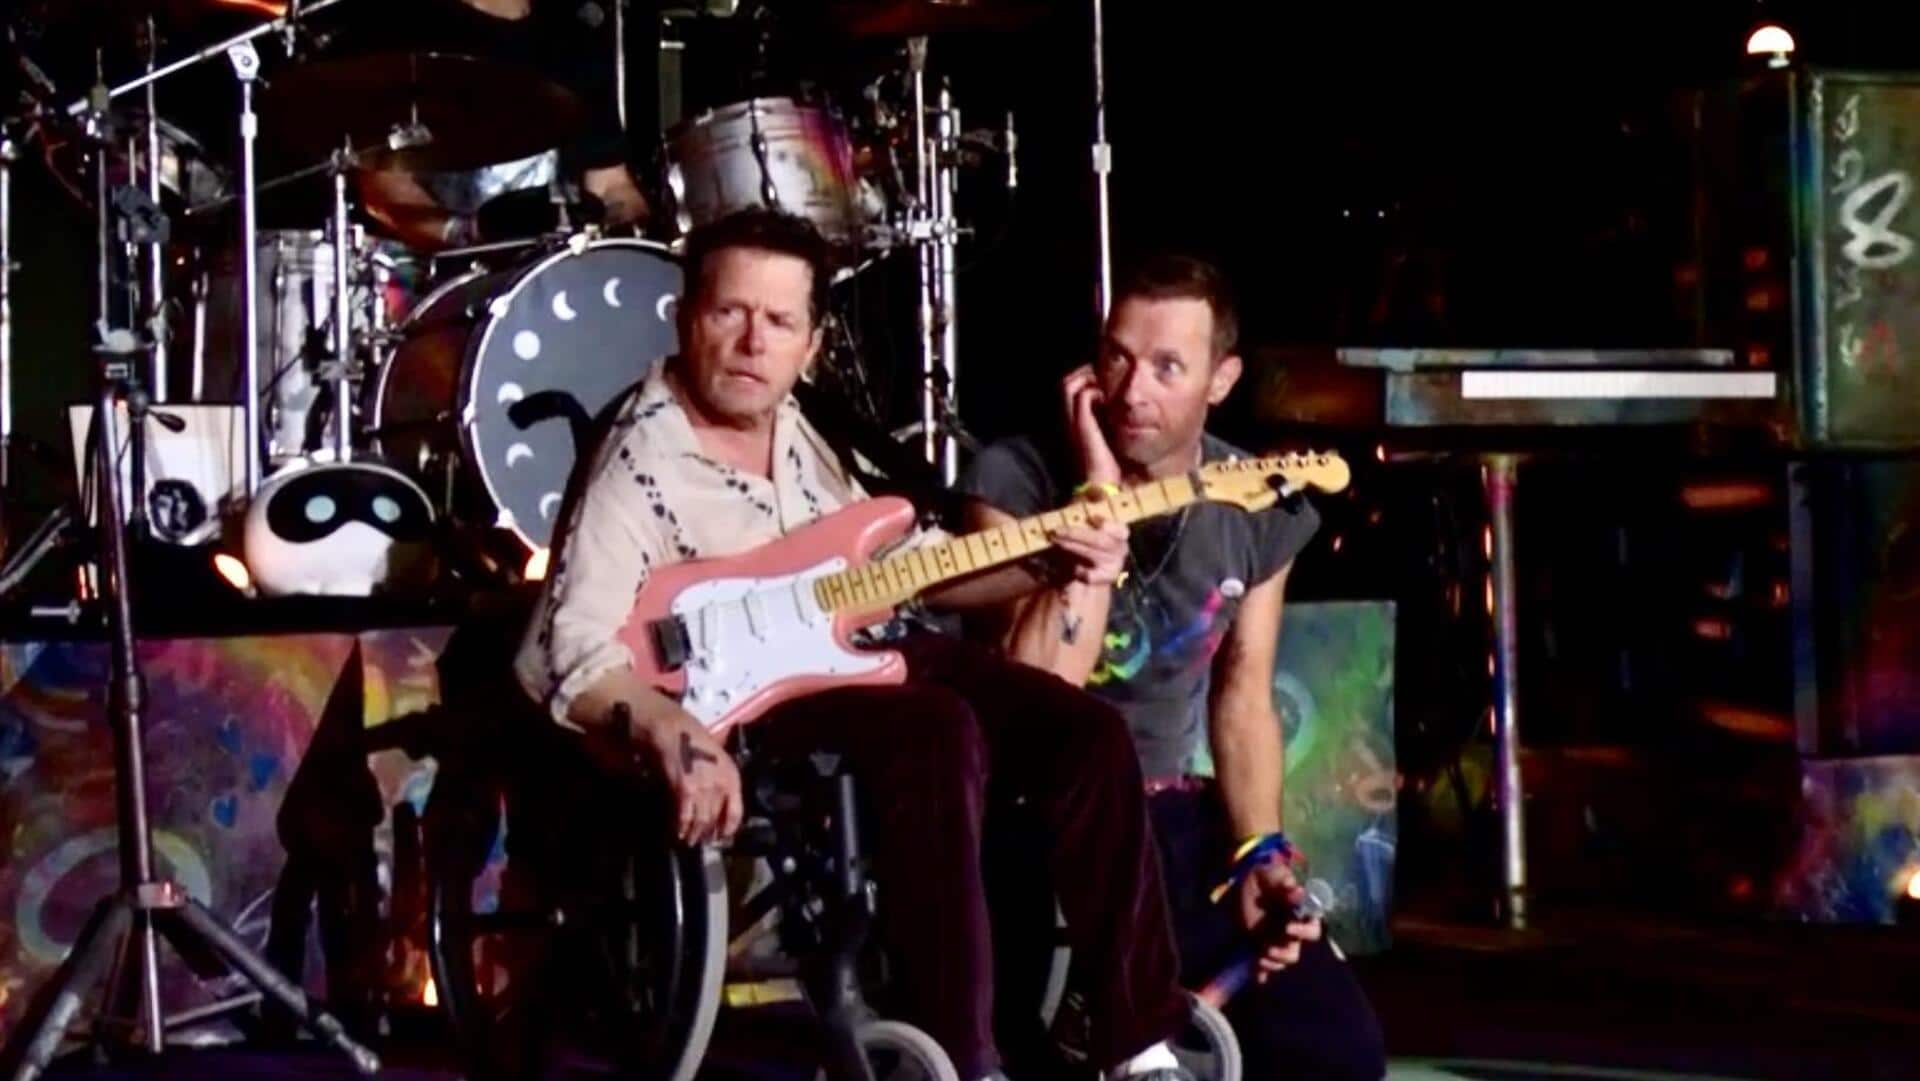 Wheelchair-bound Michael Fox jams with Coldplay, bringing fans to tears